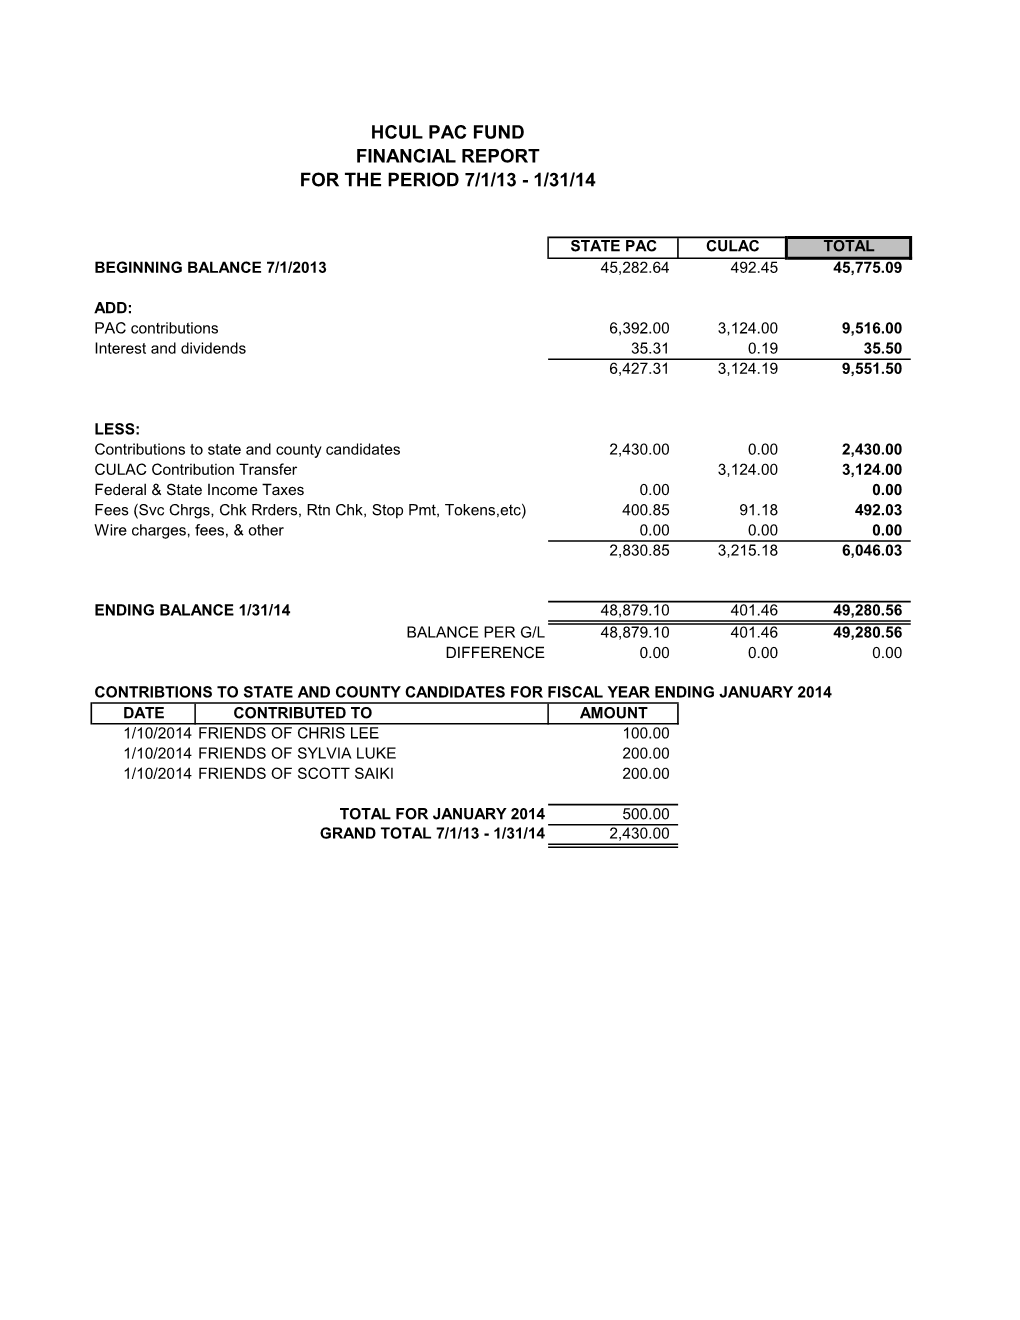 Hcul Pac Fund Financial Report for the Period 7/1/13 - 1/31/14